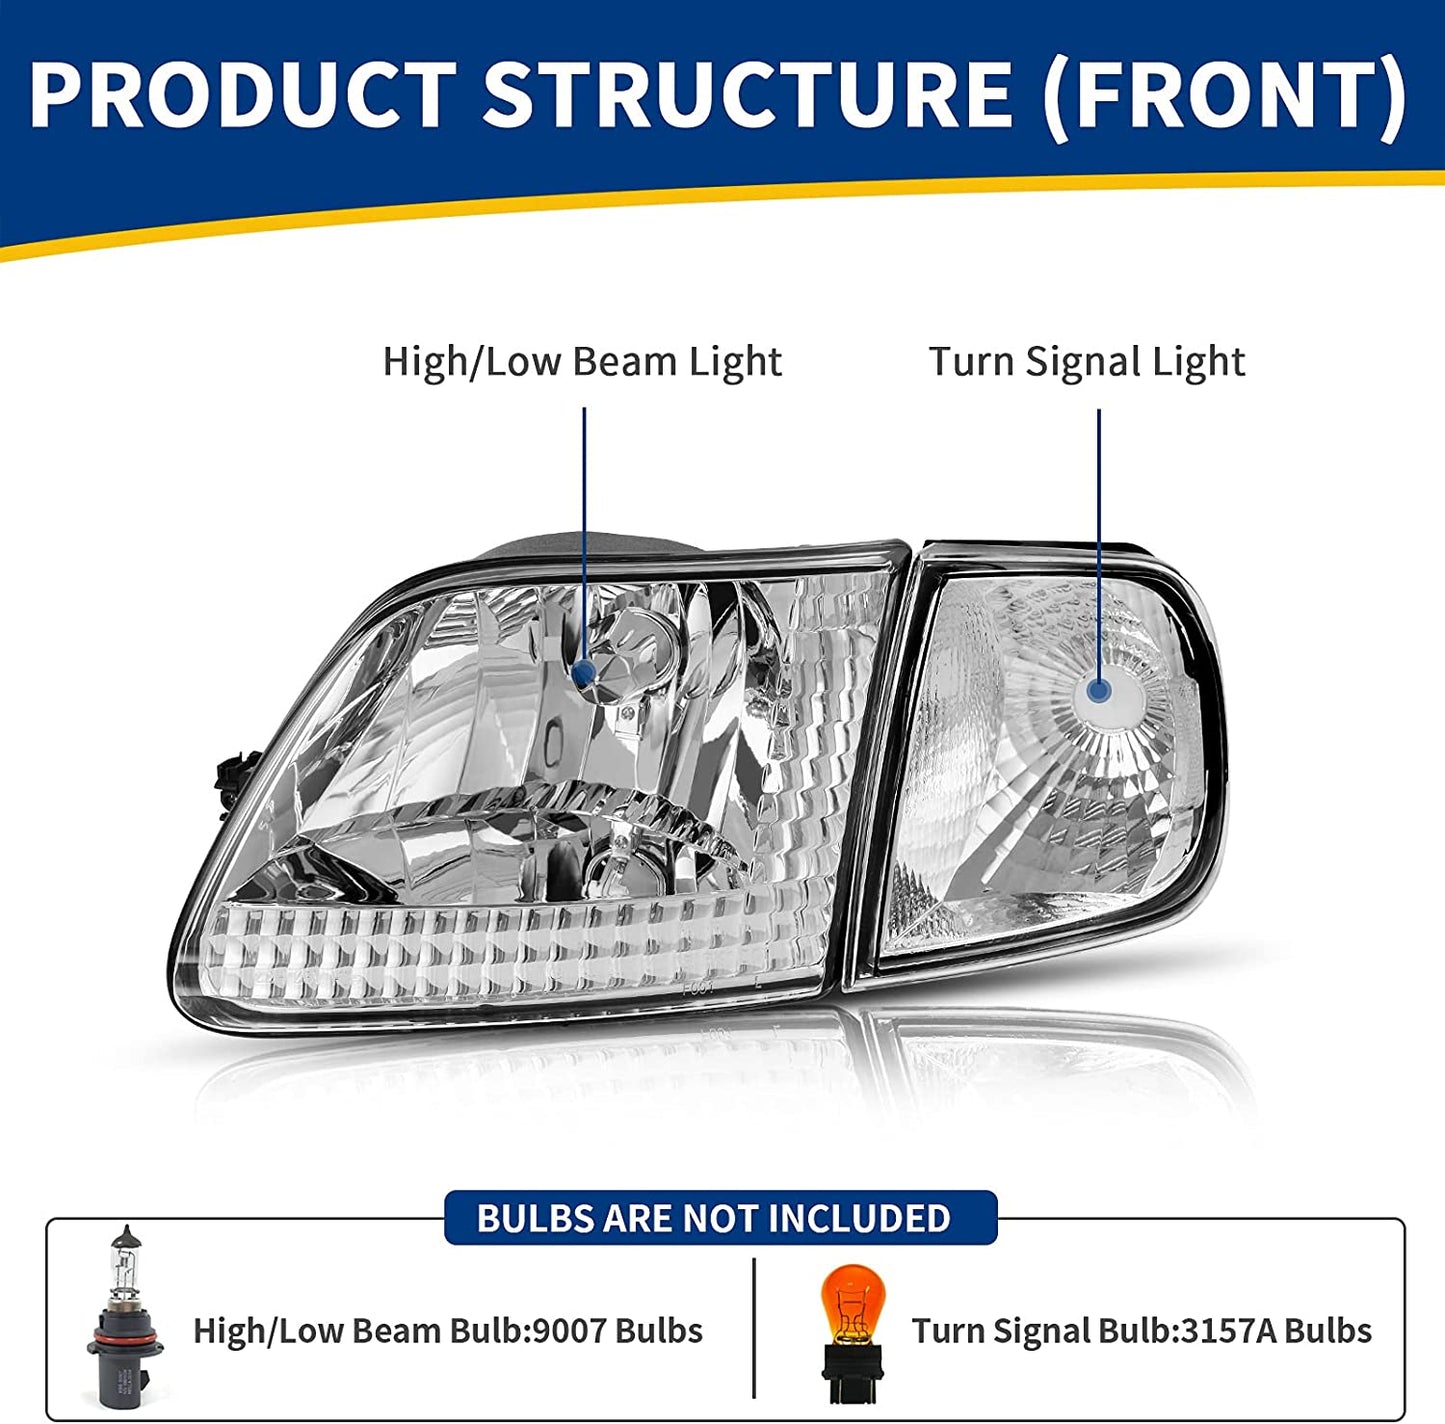 Headlight Assembly, Headlight Replacement, Fits 97-03 Ford F-150/97-02 Ford Expedition Pickup